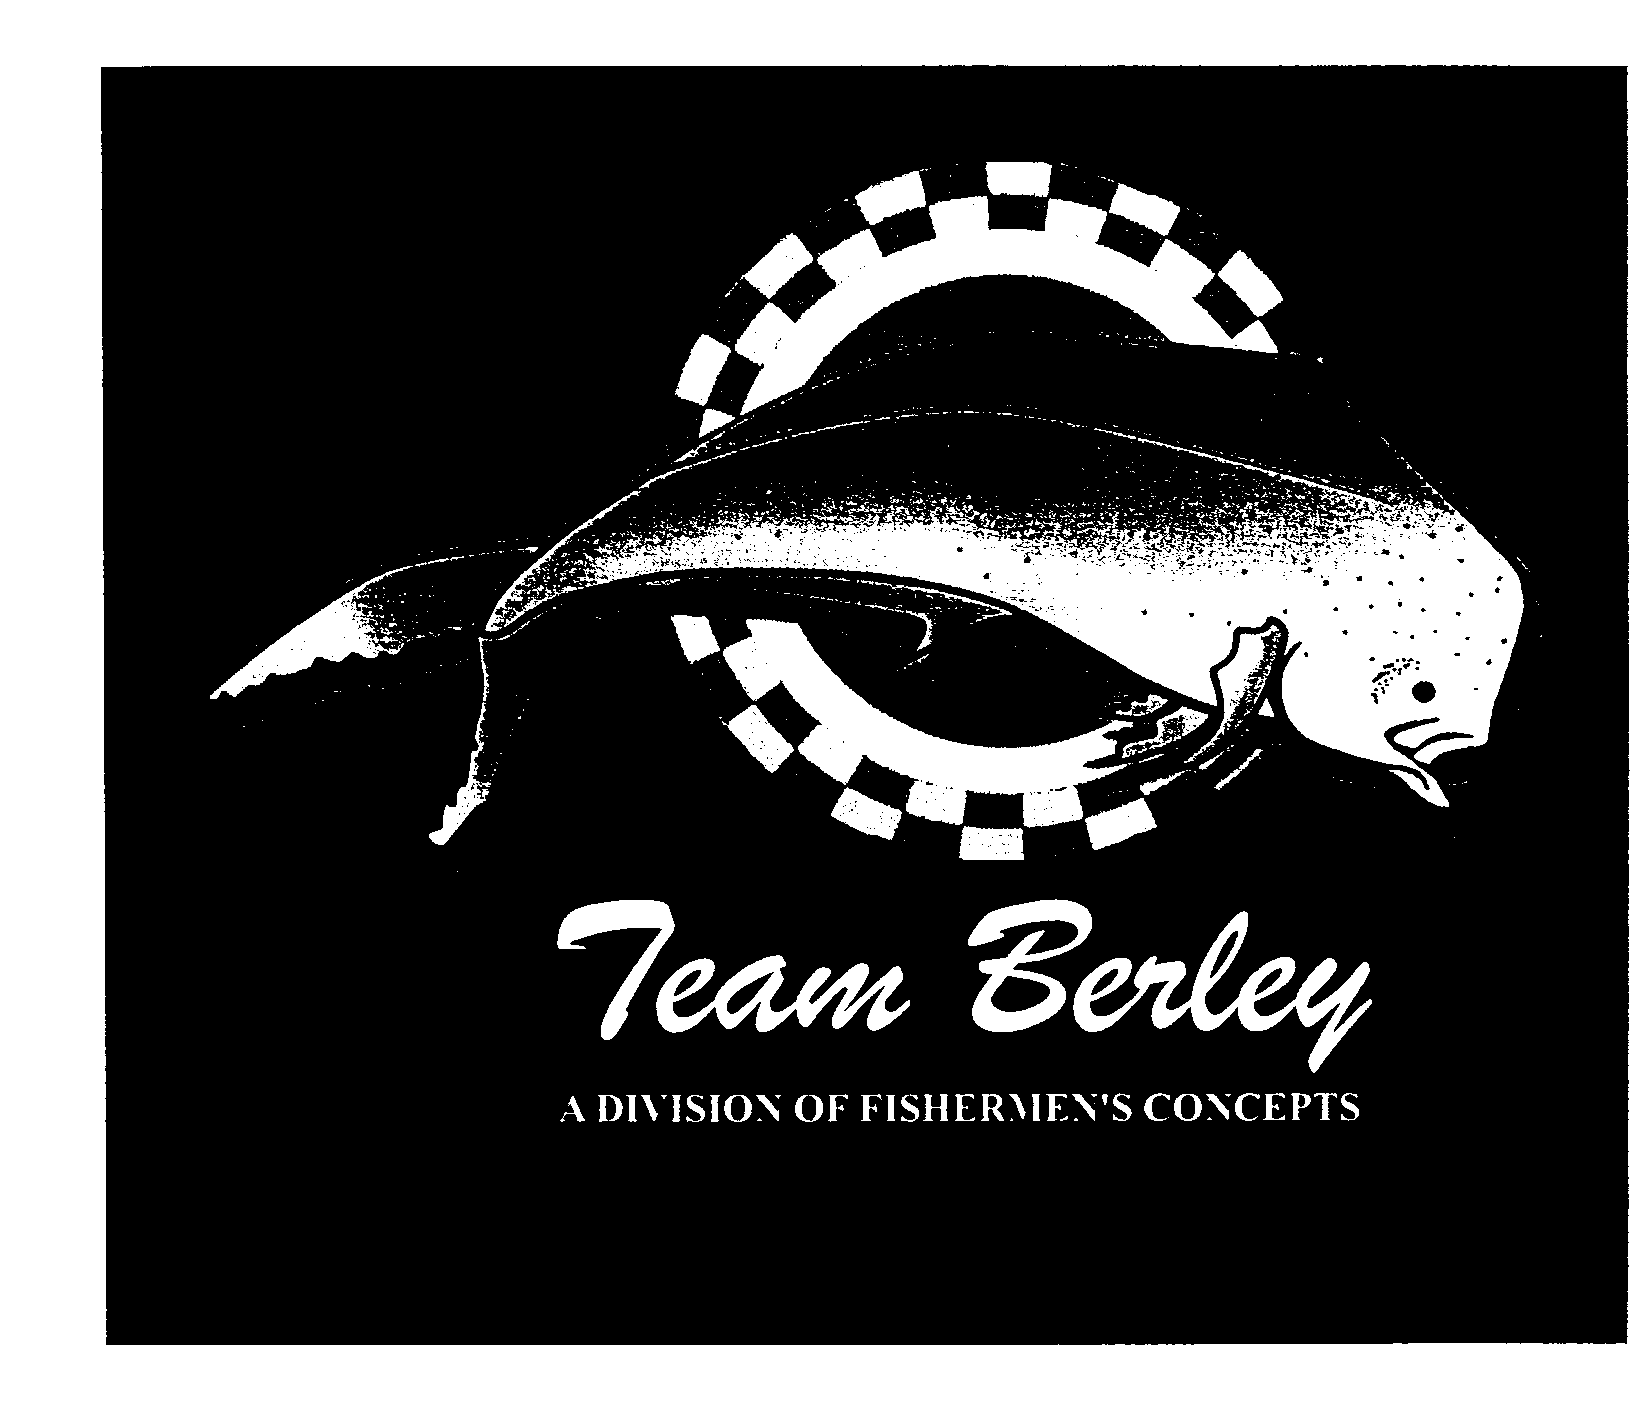  TEAM BERLEY A DIVISION OF FISHERMEN'S CONCEPTS